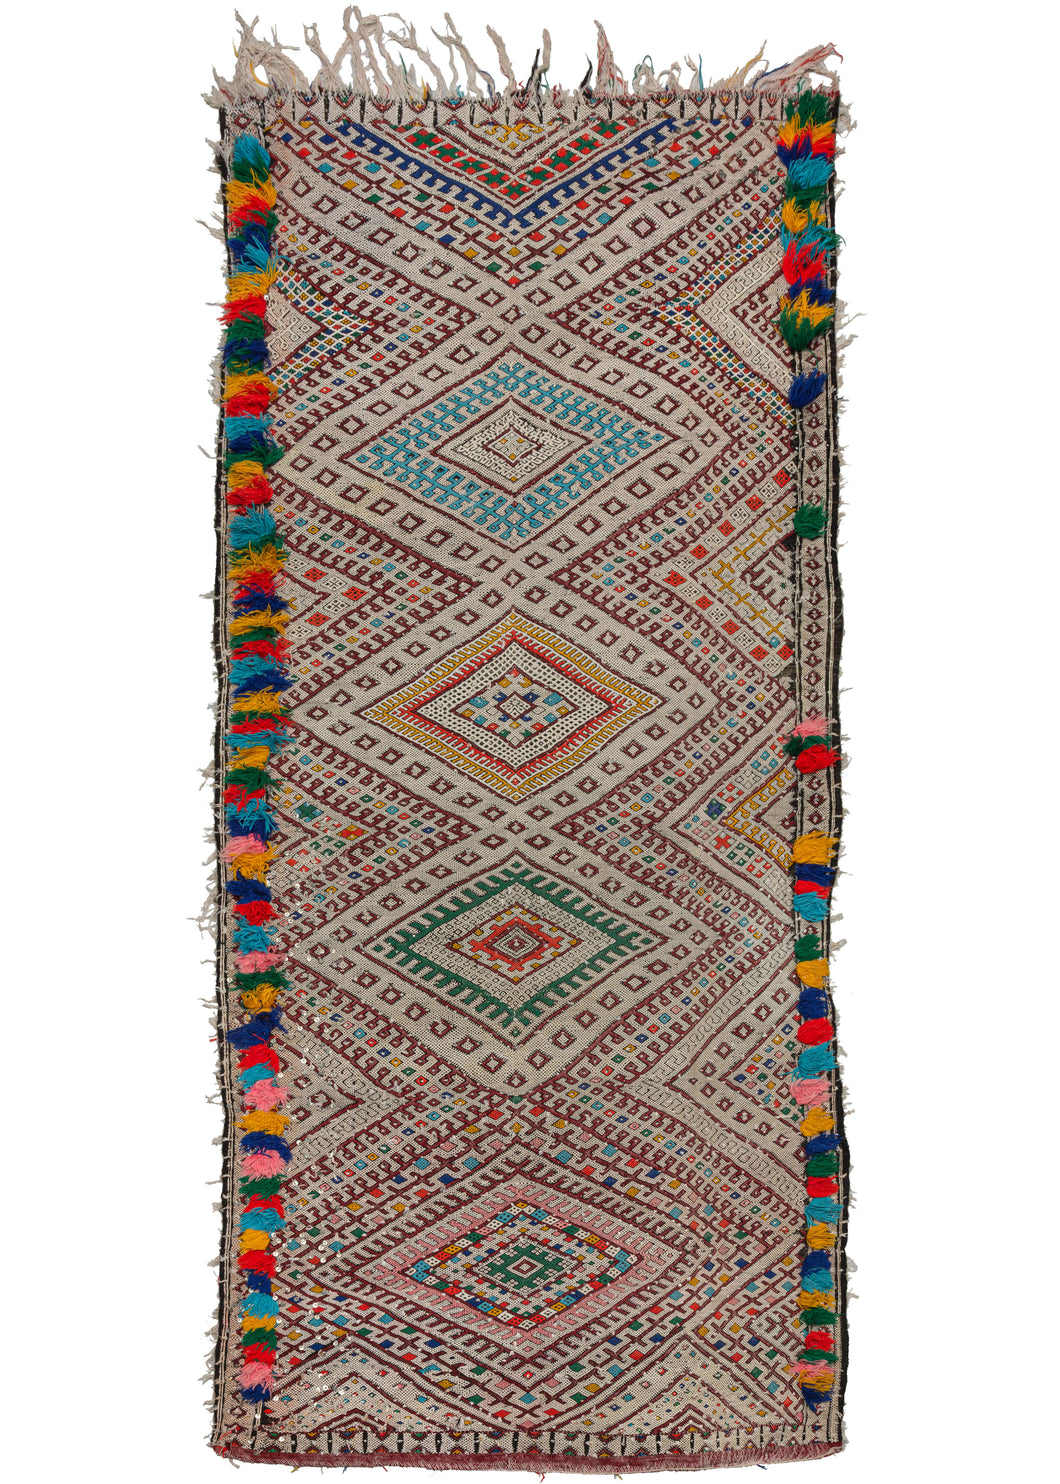 This Vintage Middle Atlas Zemmour Runner features a column of flatwoven concentric diamonds in turquoise, yellow, green, and red that pop against a white cotton field. The same tones are woven in fluffy rows of pile along the edges adding fun and excitement. It is crafted of wool and cotton wefts on a cotton foundation with dangling metal sequins woven throughout. 